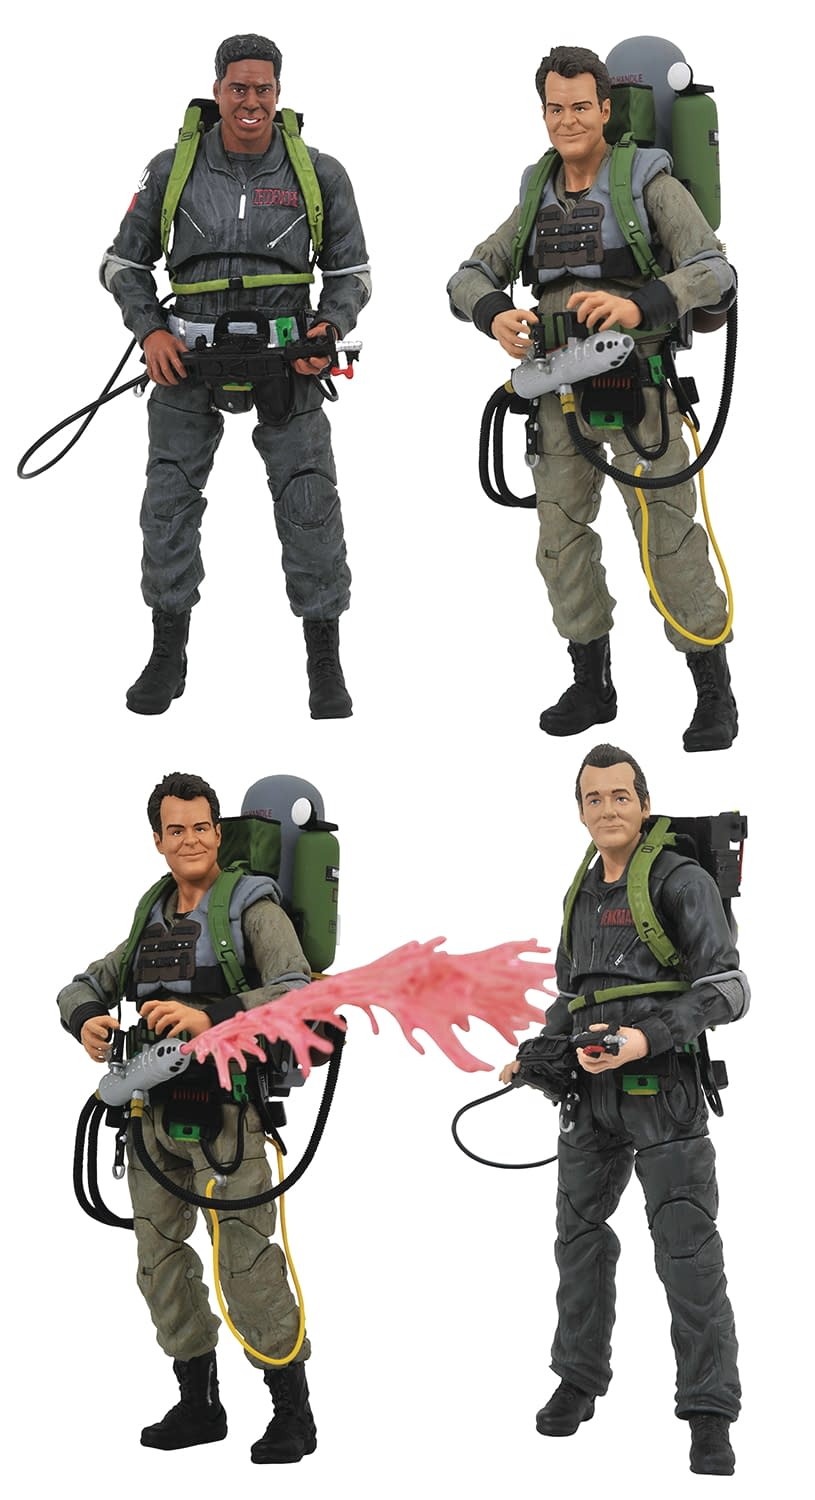 Diamond Select Toys in August: Arrow, Ghostbusters, Pacific Rim, and More